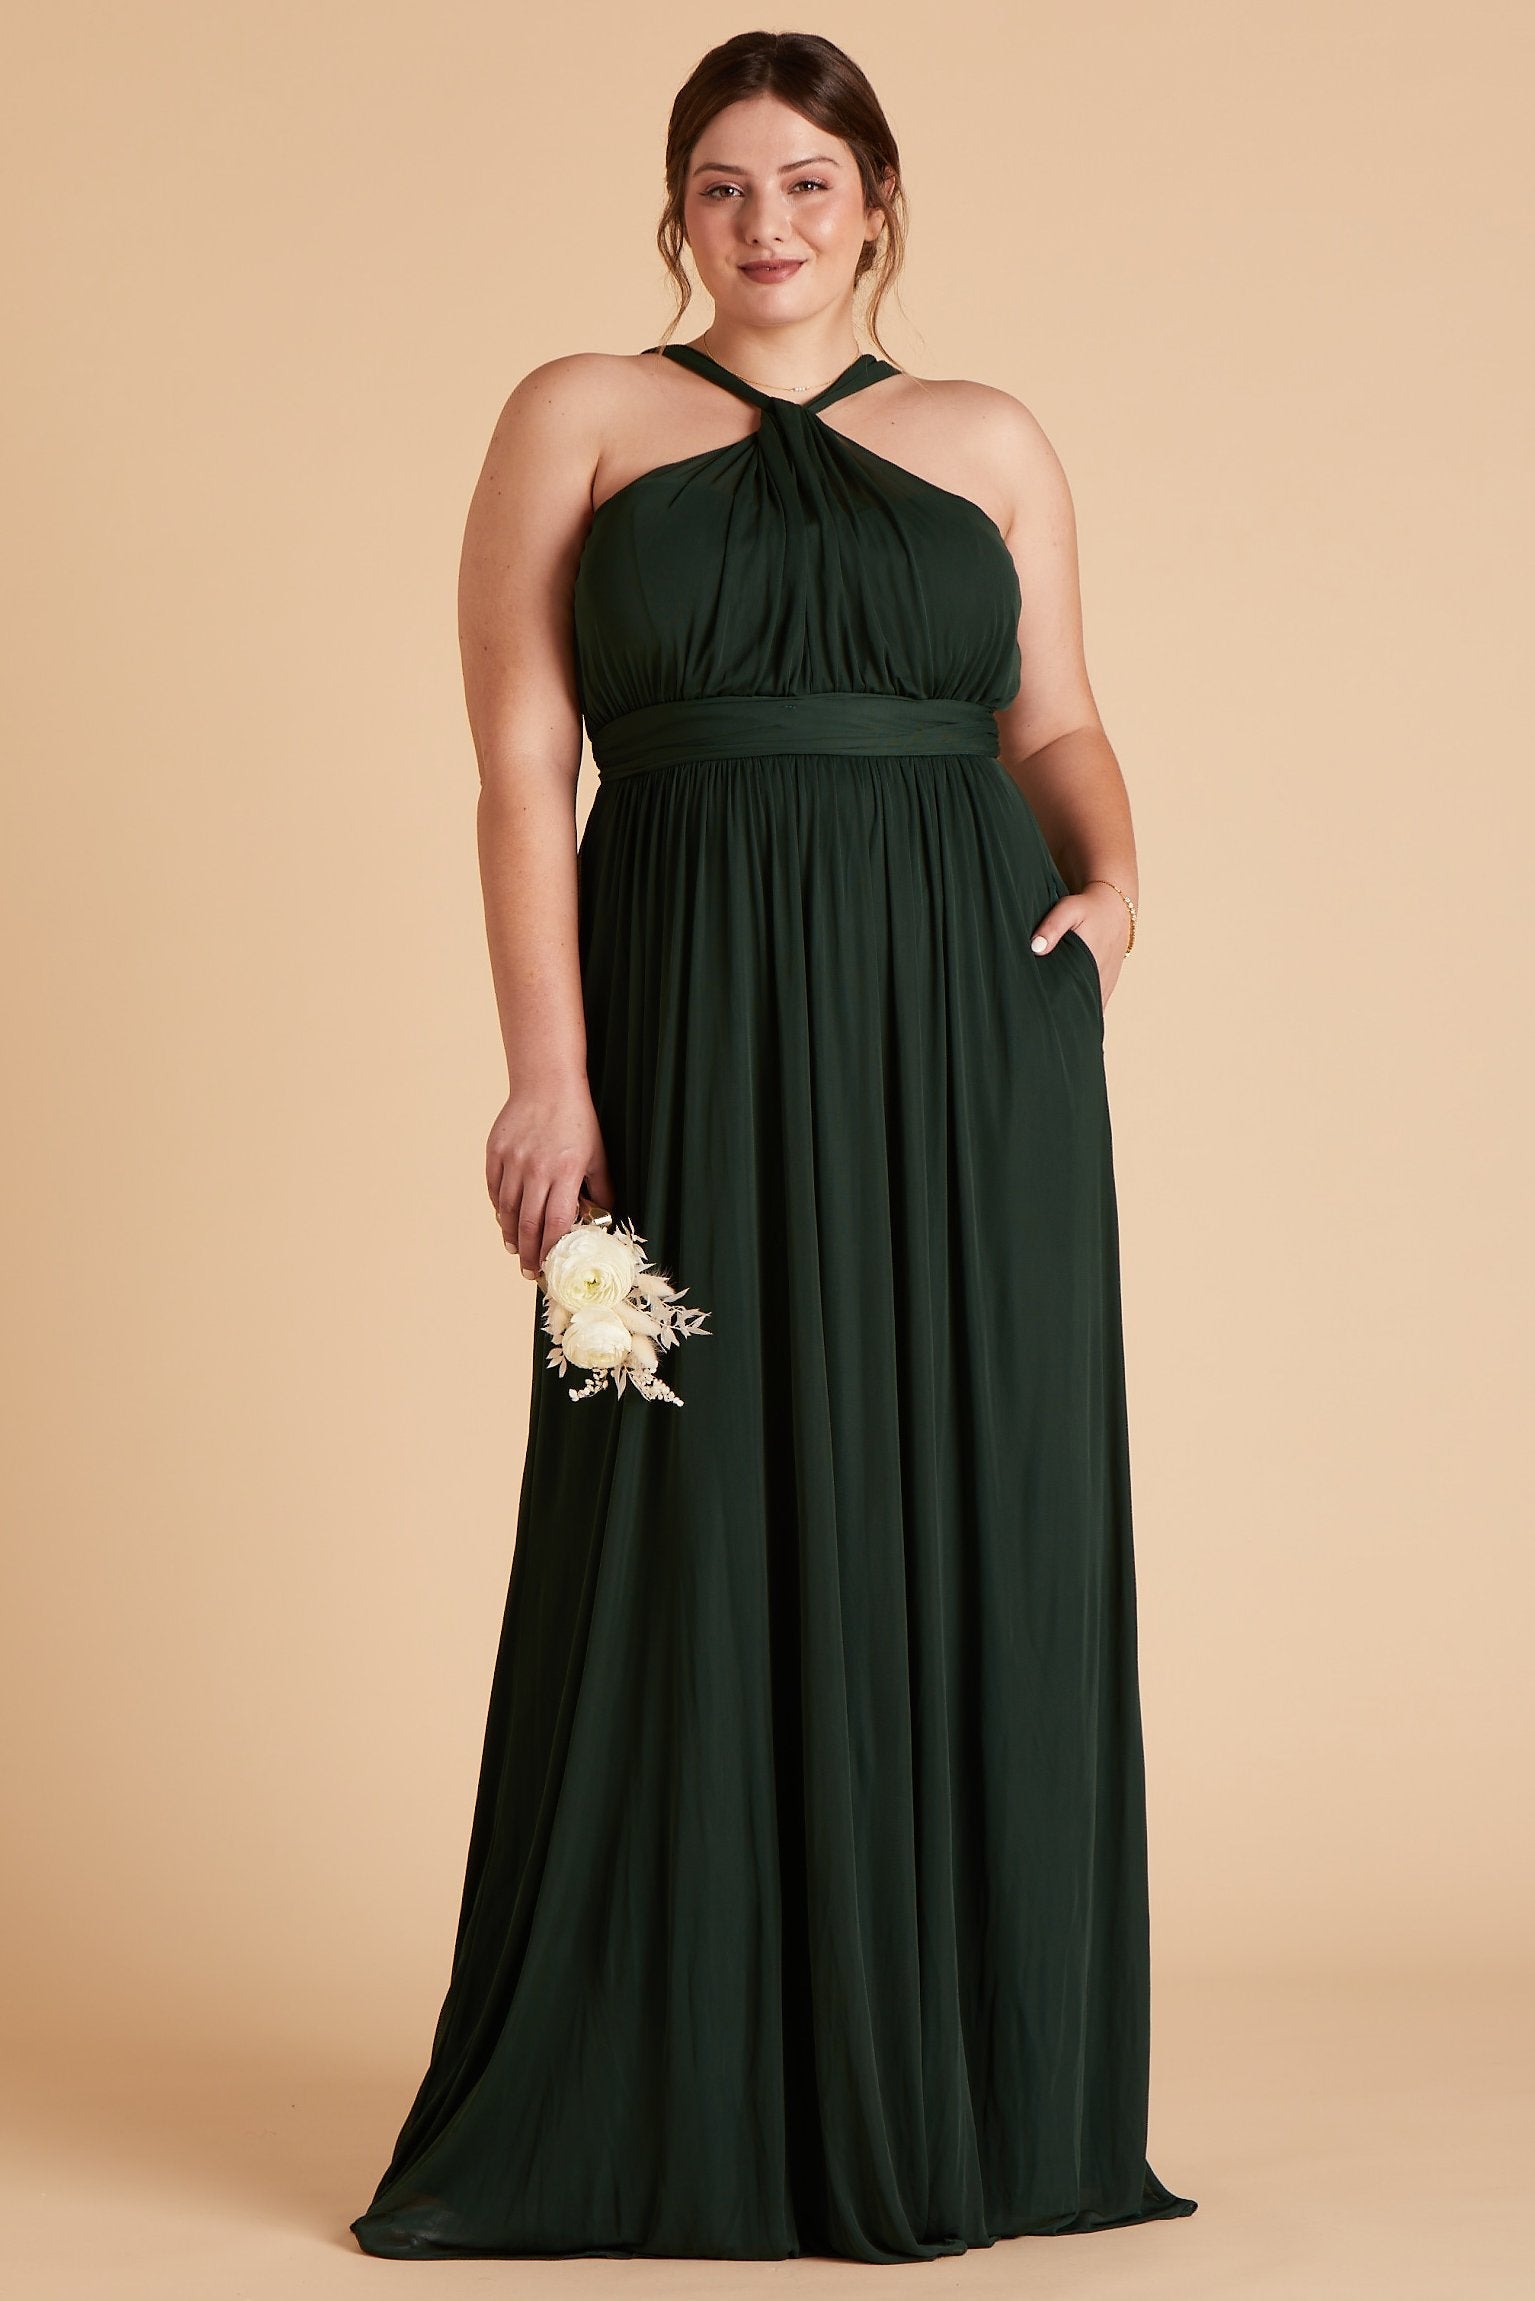 Kiko plus size bridesmaid dress in emerald green chiffon by Birdy Grey, front view with hand in pocket